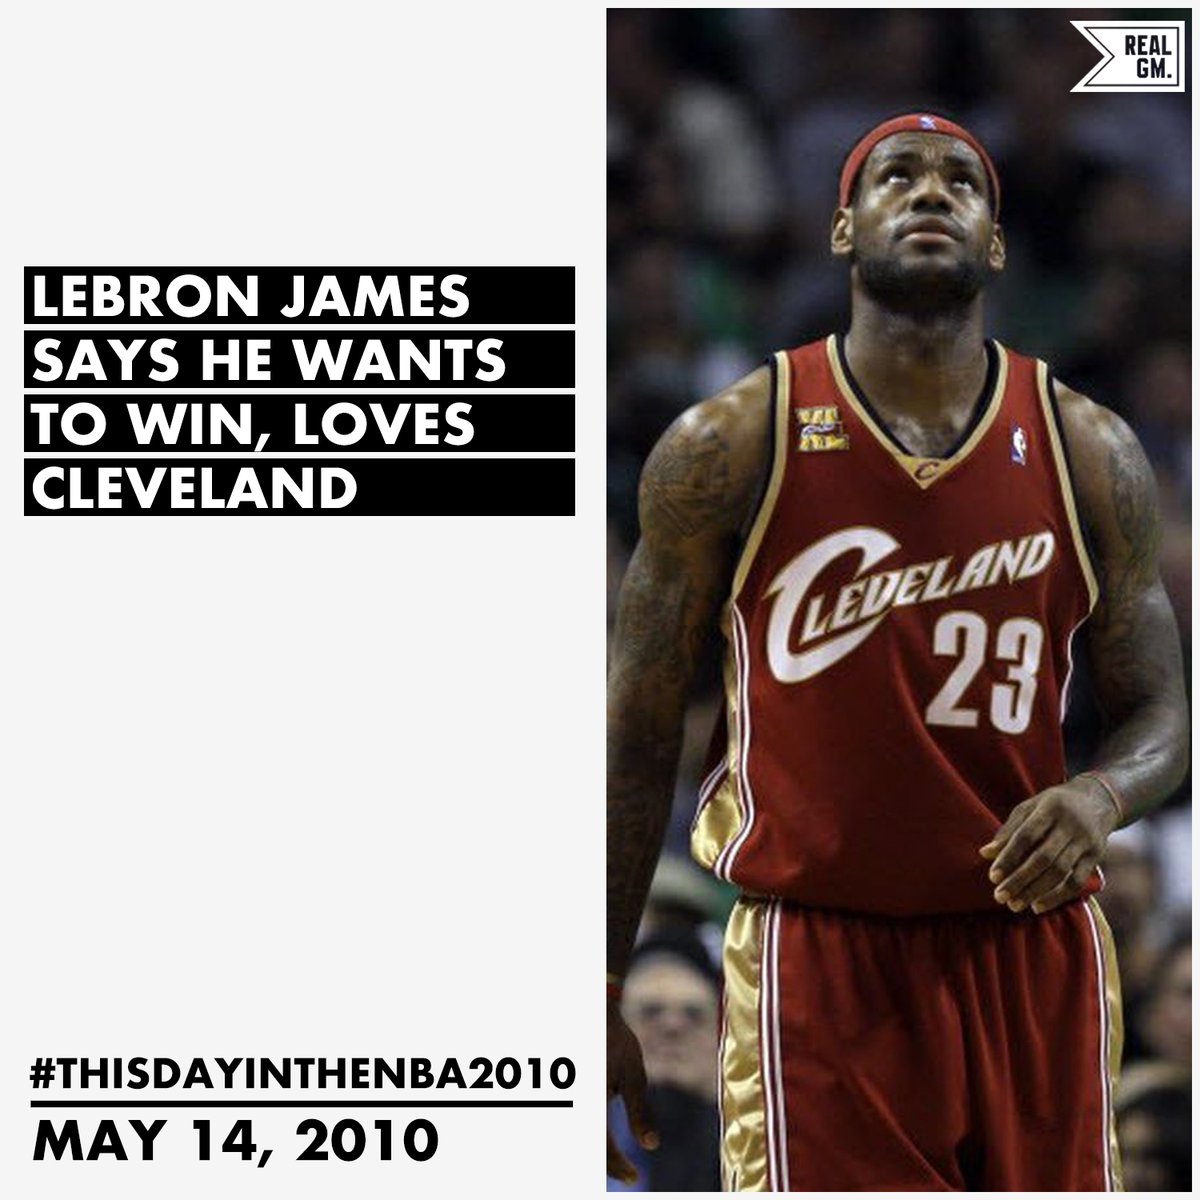  #ThisDayInTheNBA2010May 14, 2010LeBron James Says He Wants To Win, Loves Cleveland https://basketball.realgm.com/wiretap/203888/LeBron-James-Says-He-Wants-To-Win-Loves-Cleveland